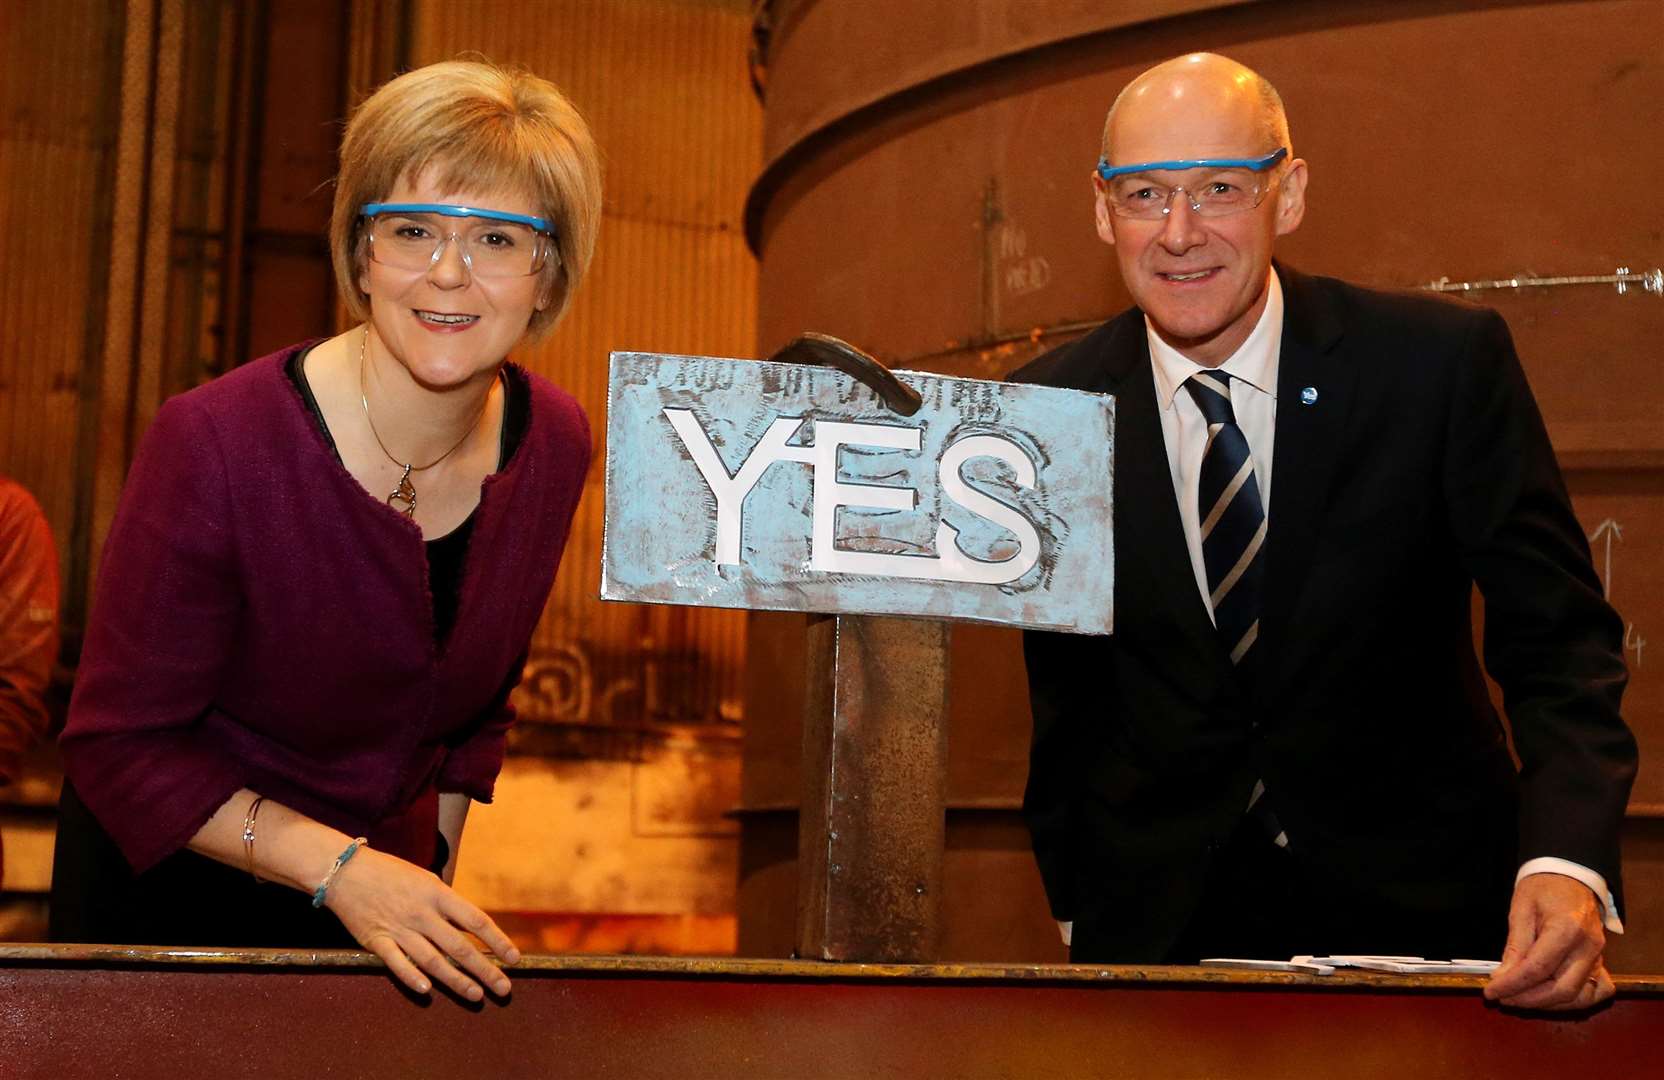 Mr Swinney and Nicola Sturgeon pose with a Yes sign ahead of the 2014 Scottish independence referendum (Lynne Cameron/PA)